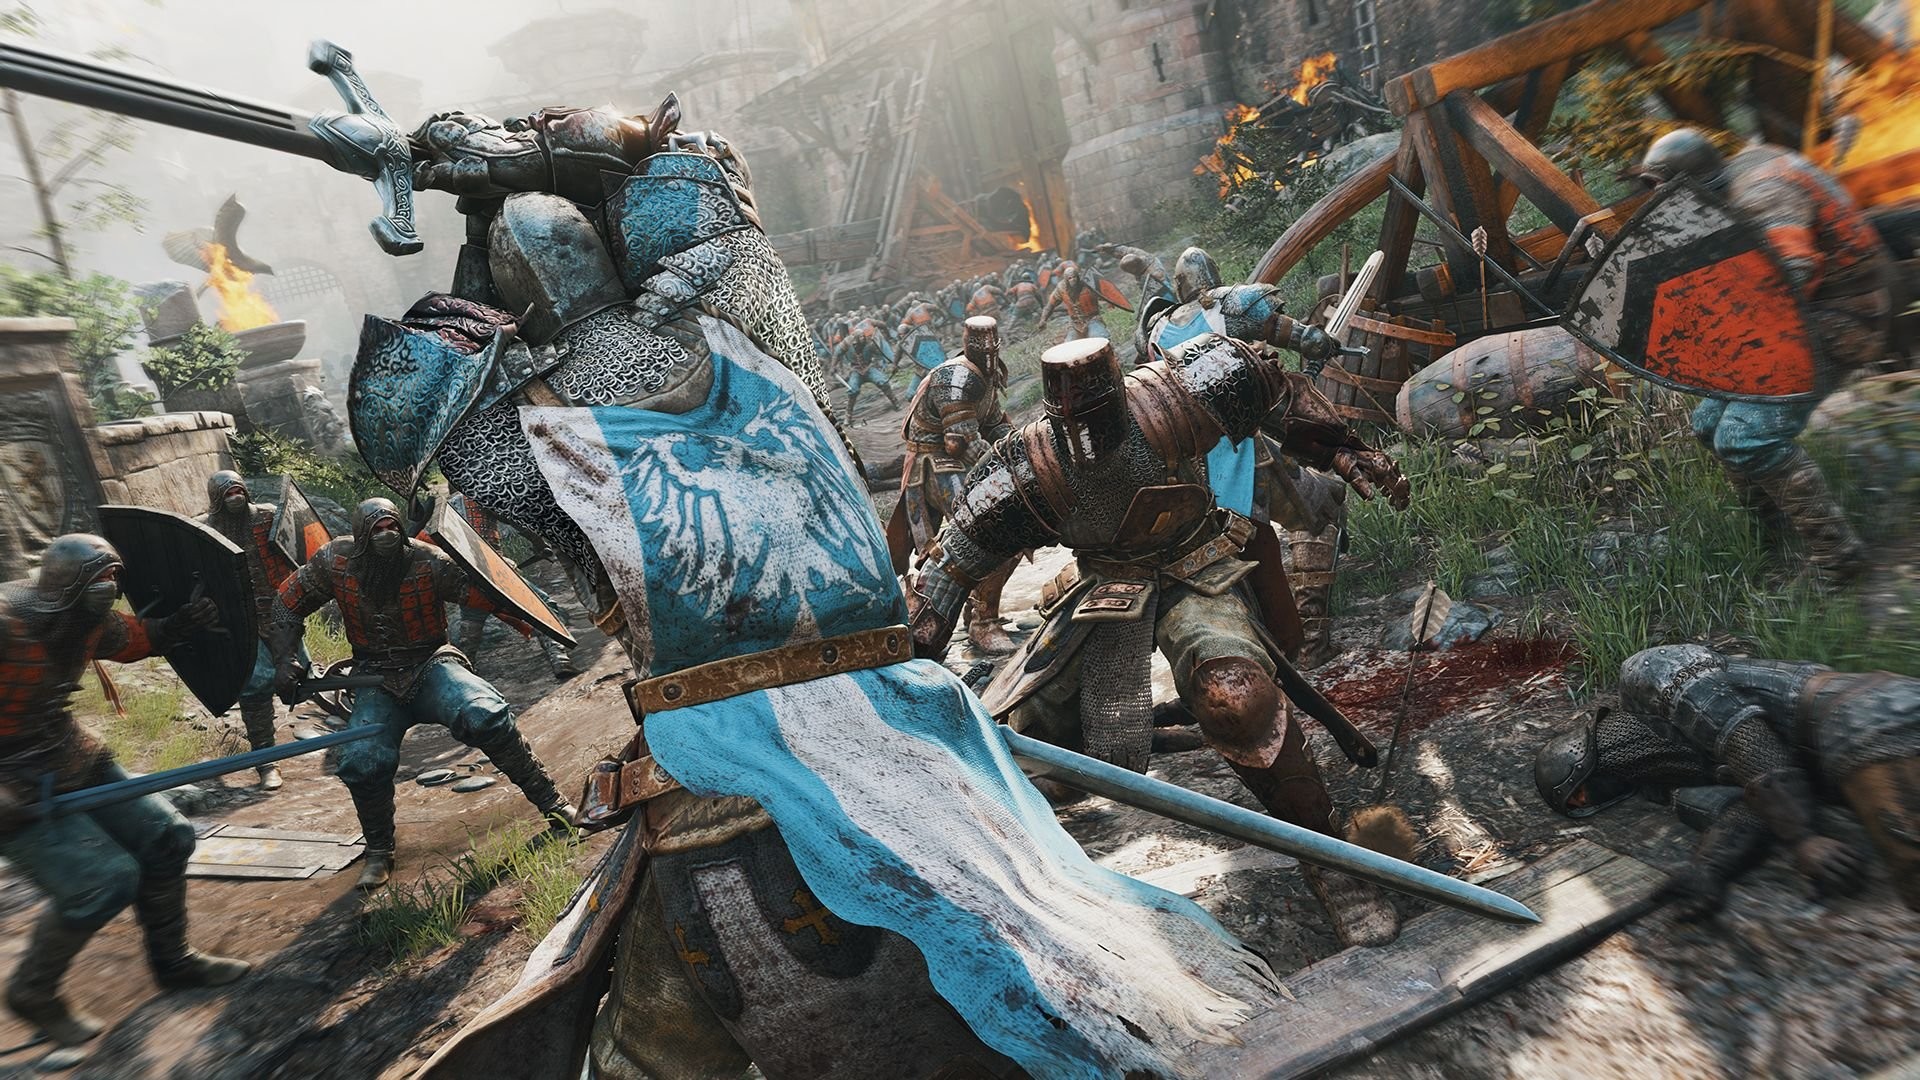 1920x1080 medieval, battle, fhonor, full hd wallpapers, honor, viking, free stock